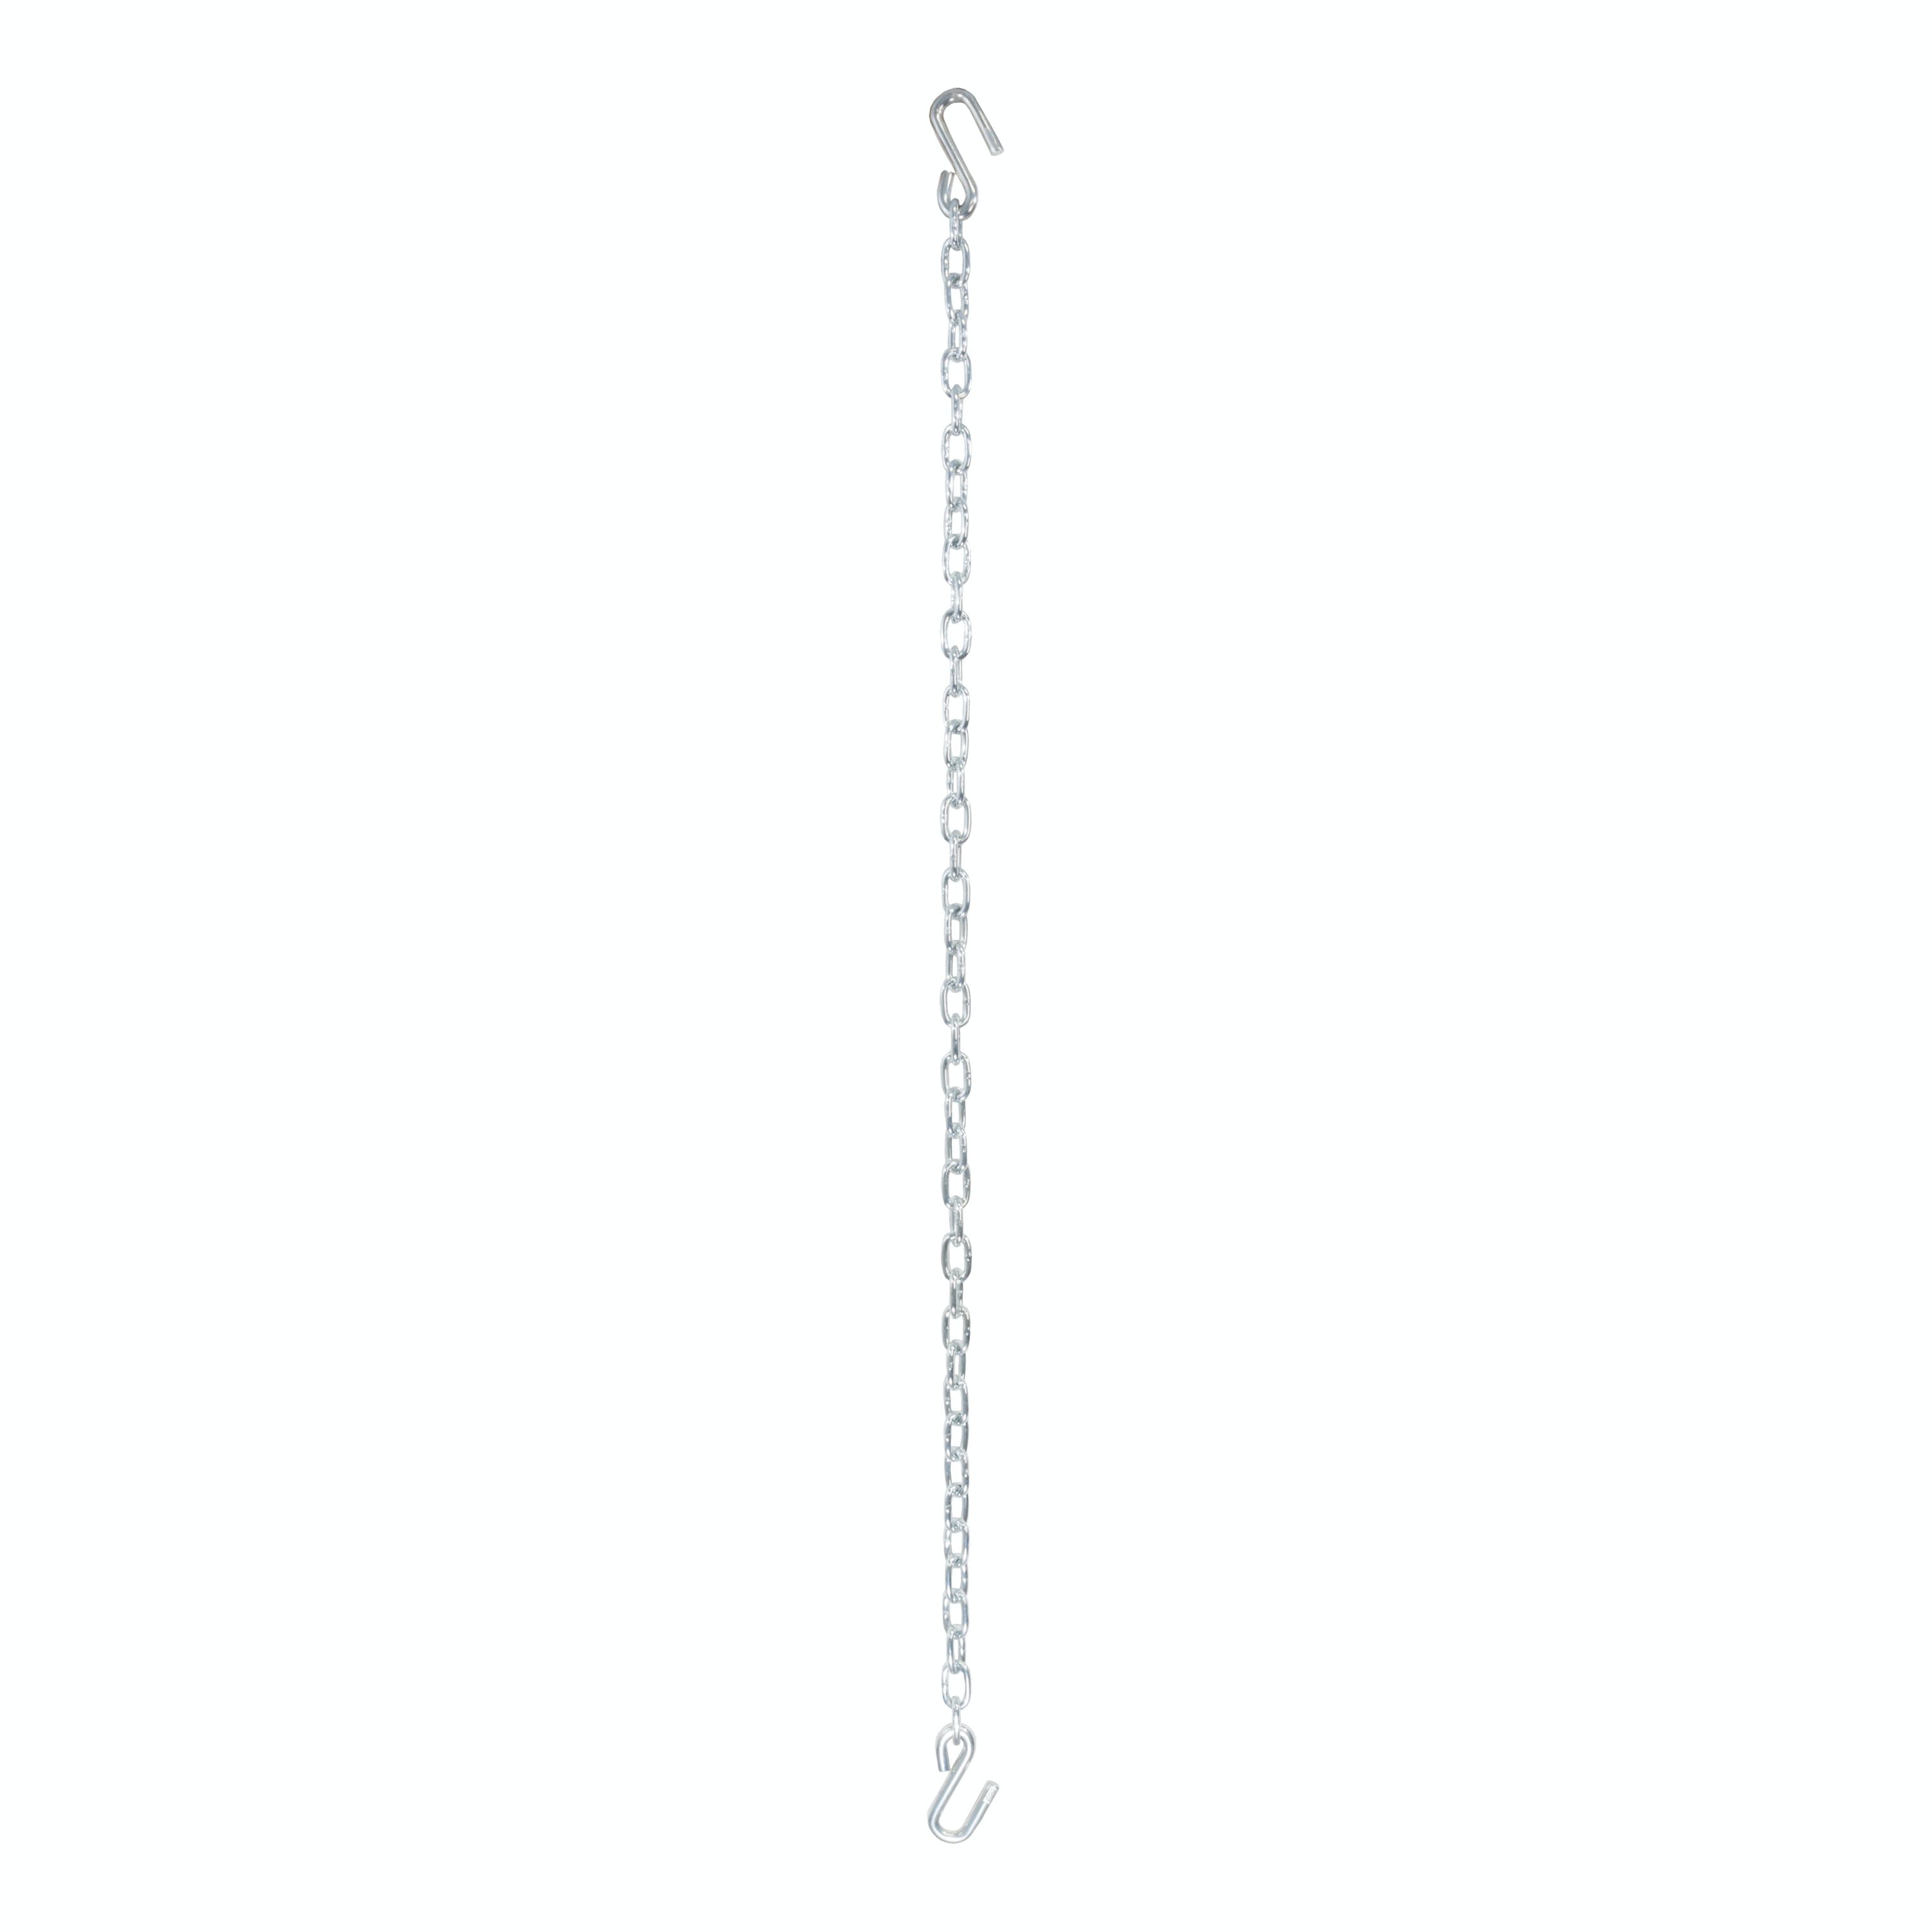 CURT 80010 48 Safety Chain with 2 S-Hooks (2,000 lbs, Clear Zinc)